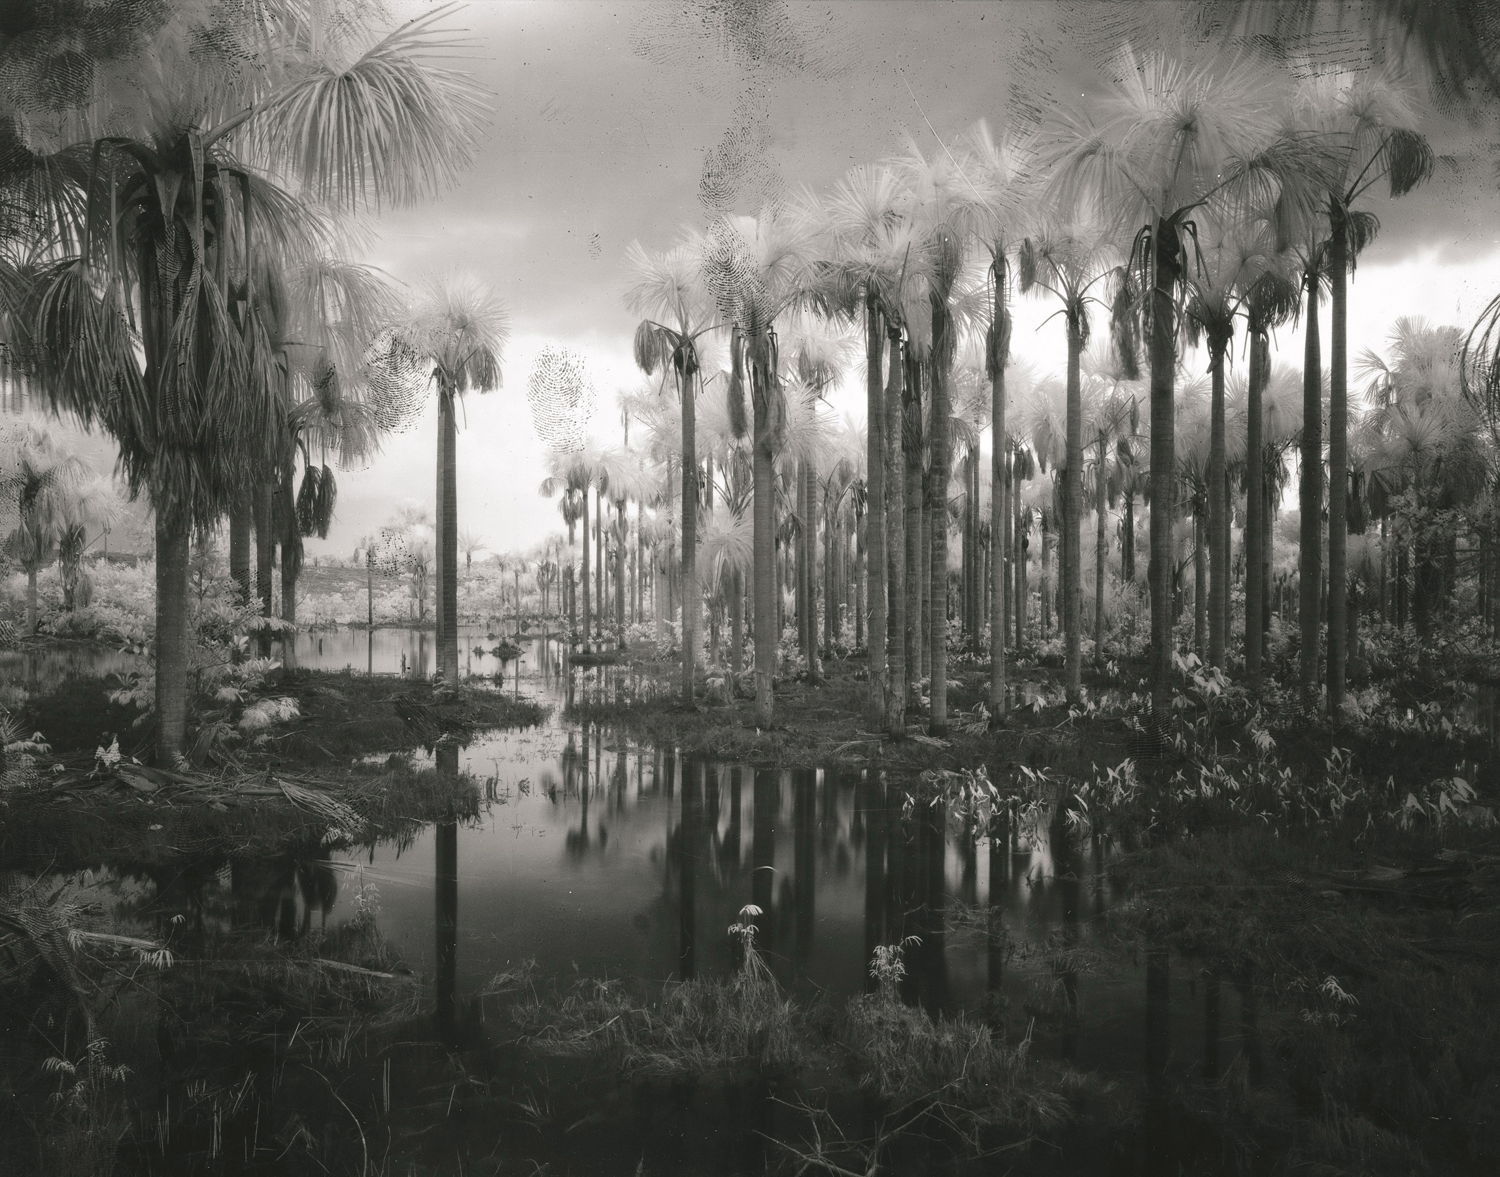 Richard Mosse, Domesticated Palms, Amazonas, 2020. Courtesy of the artist and Jack  Shainman Gallery, New York.